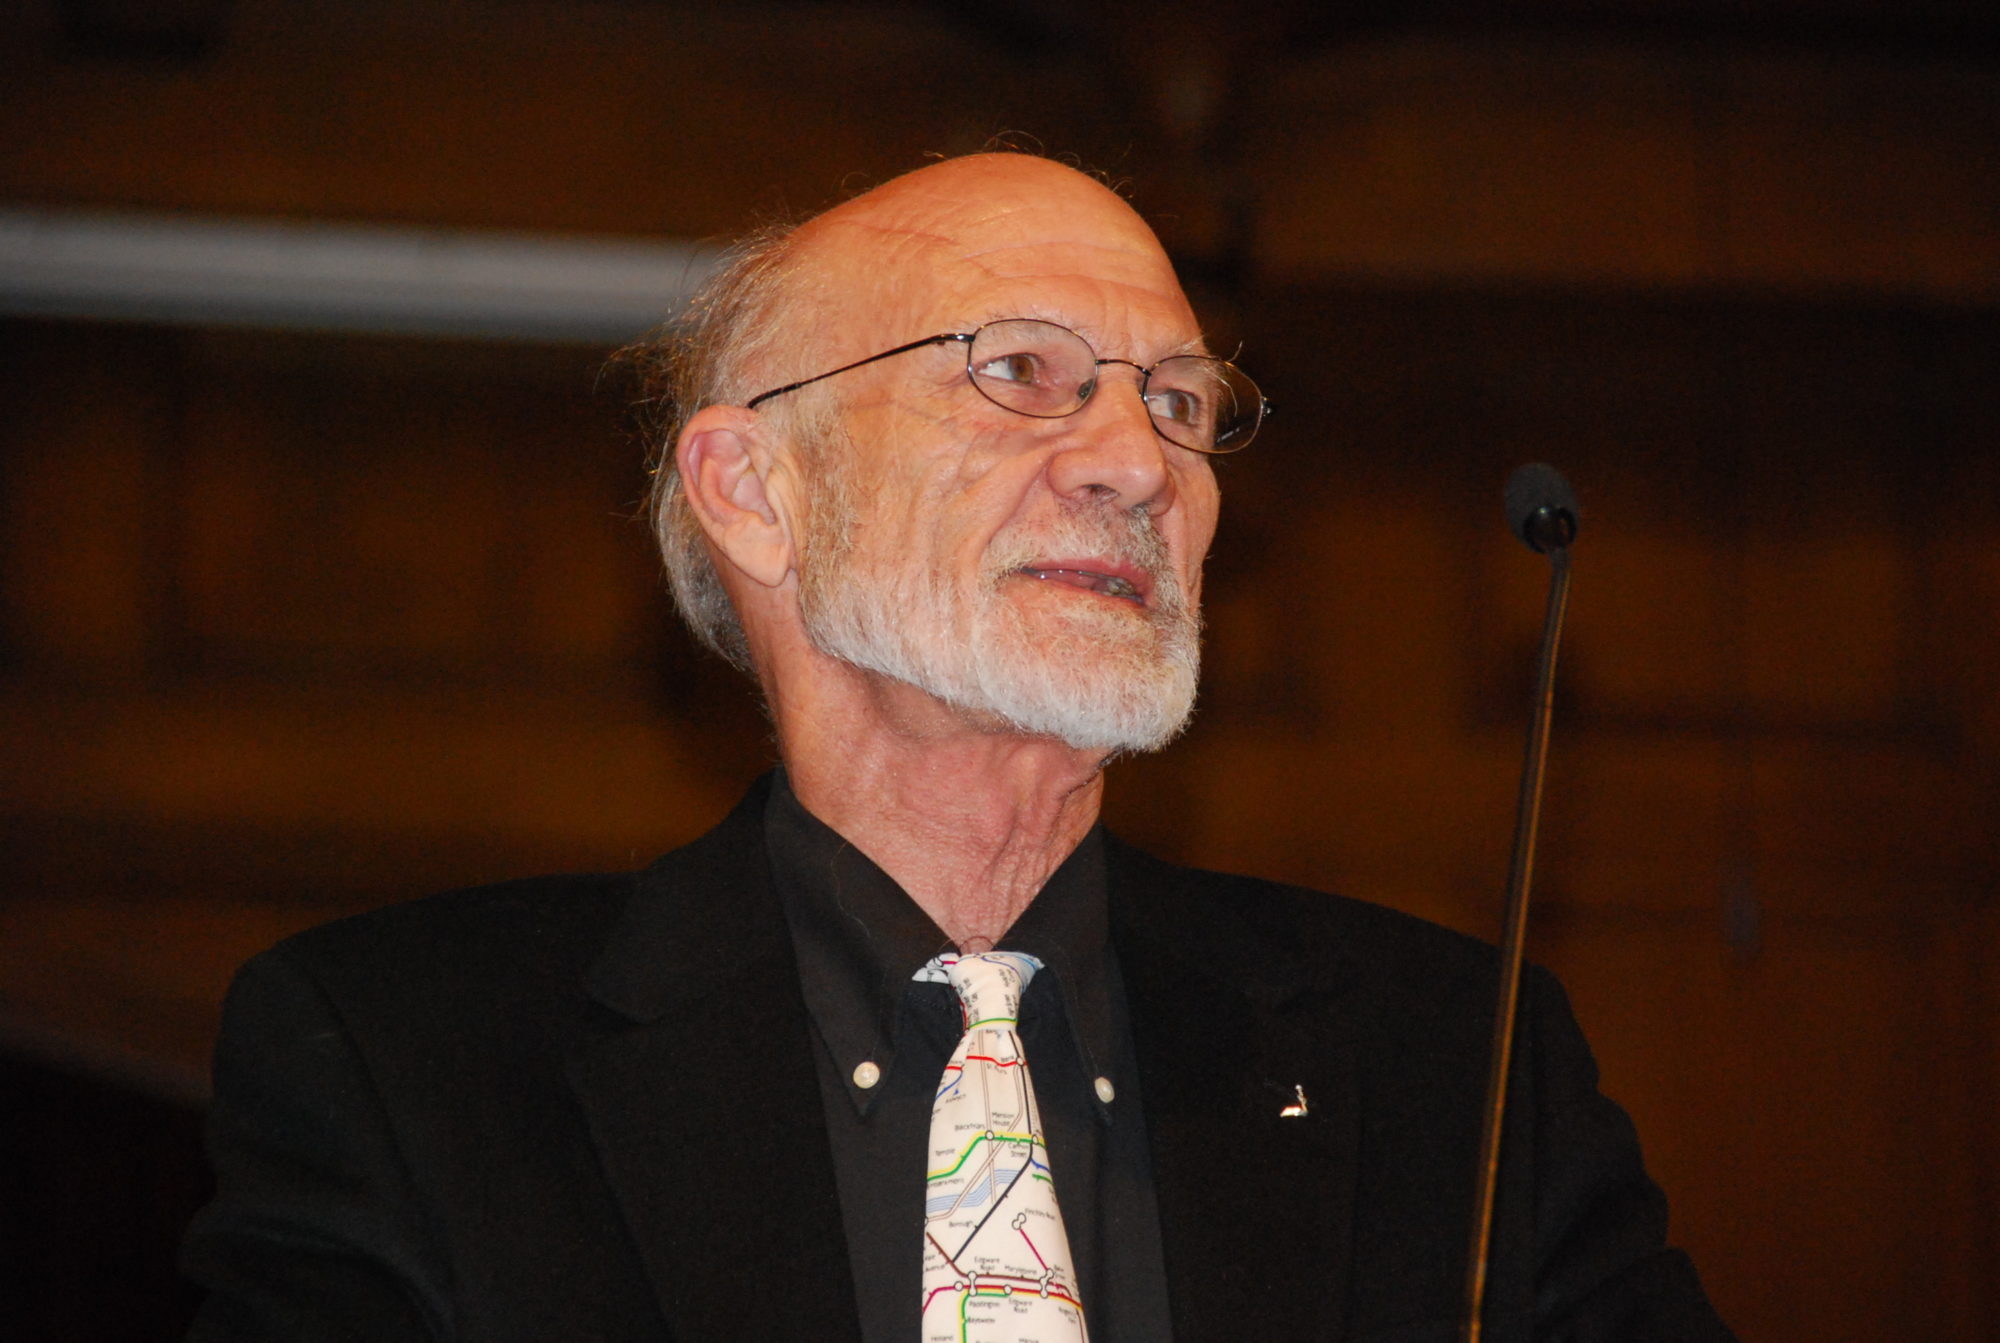 Hauerwas Clickbait Makes the Rounds on Social Media